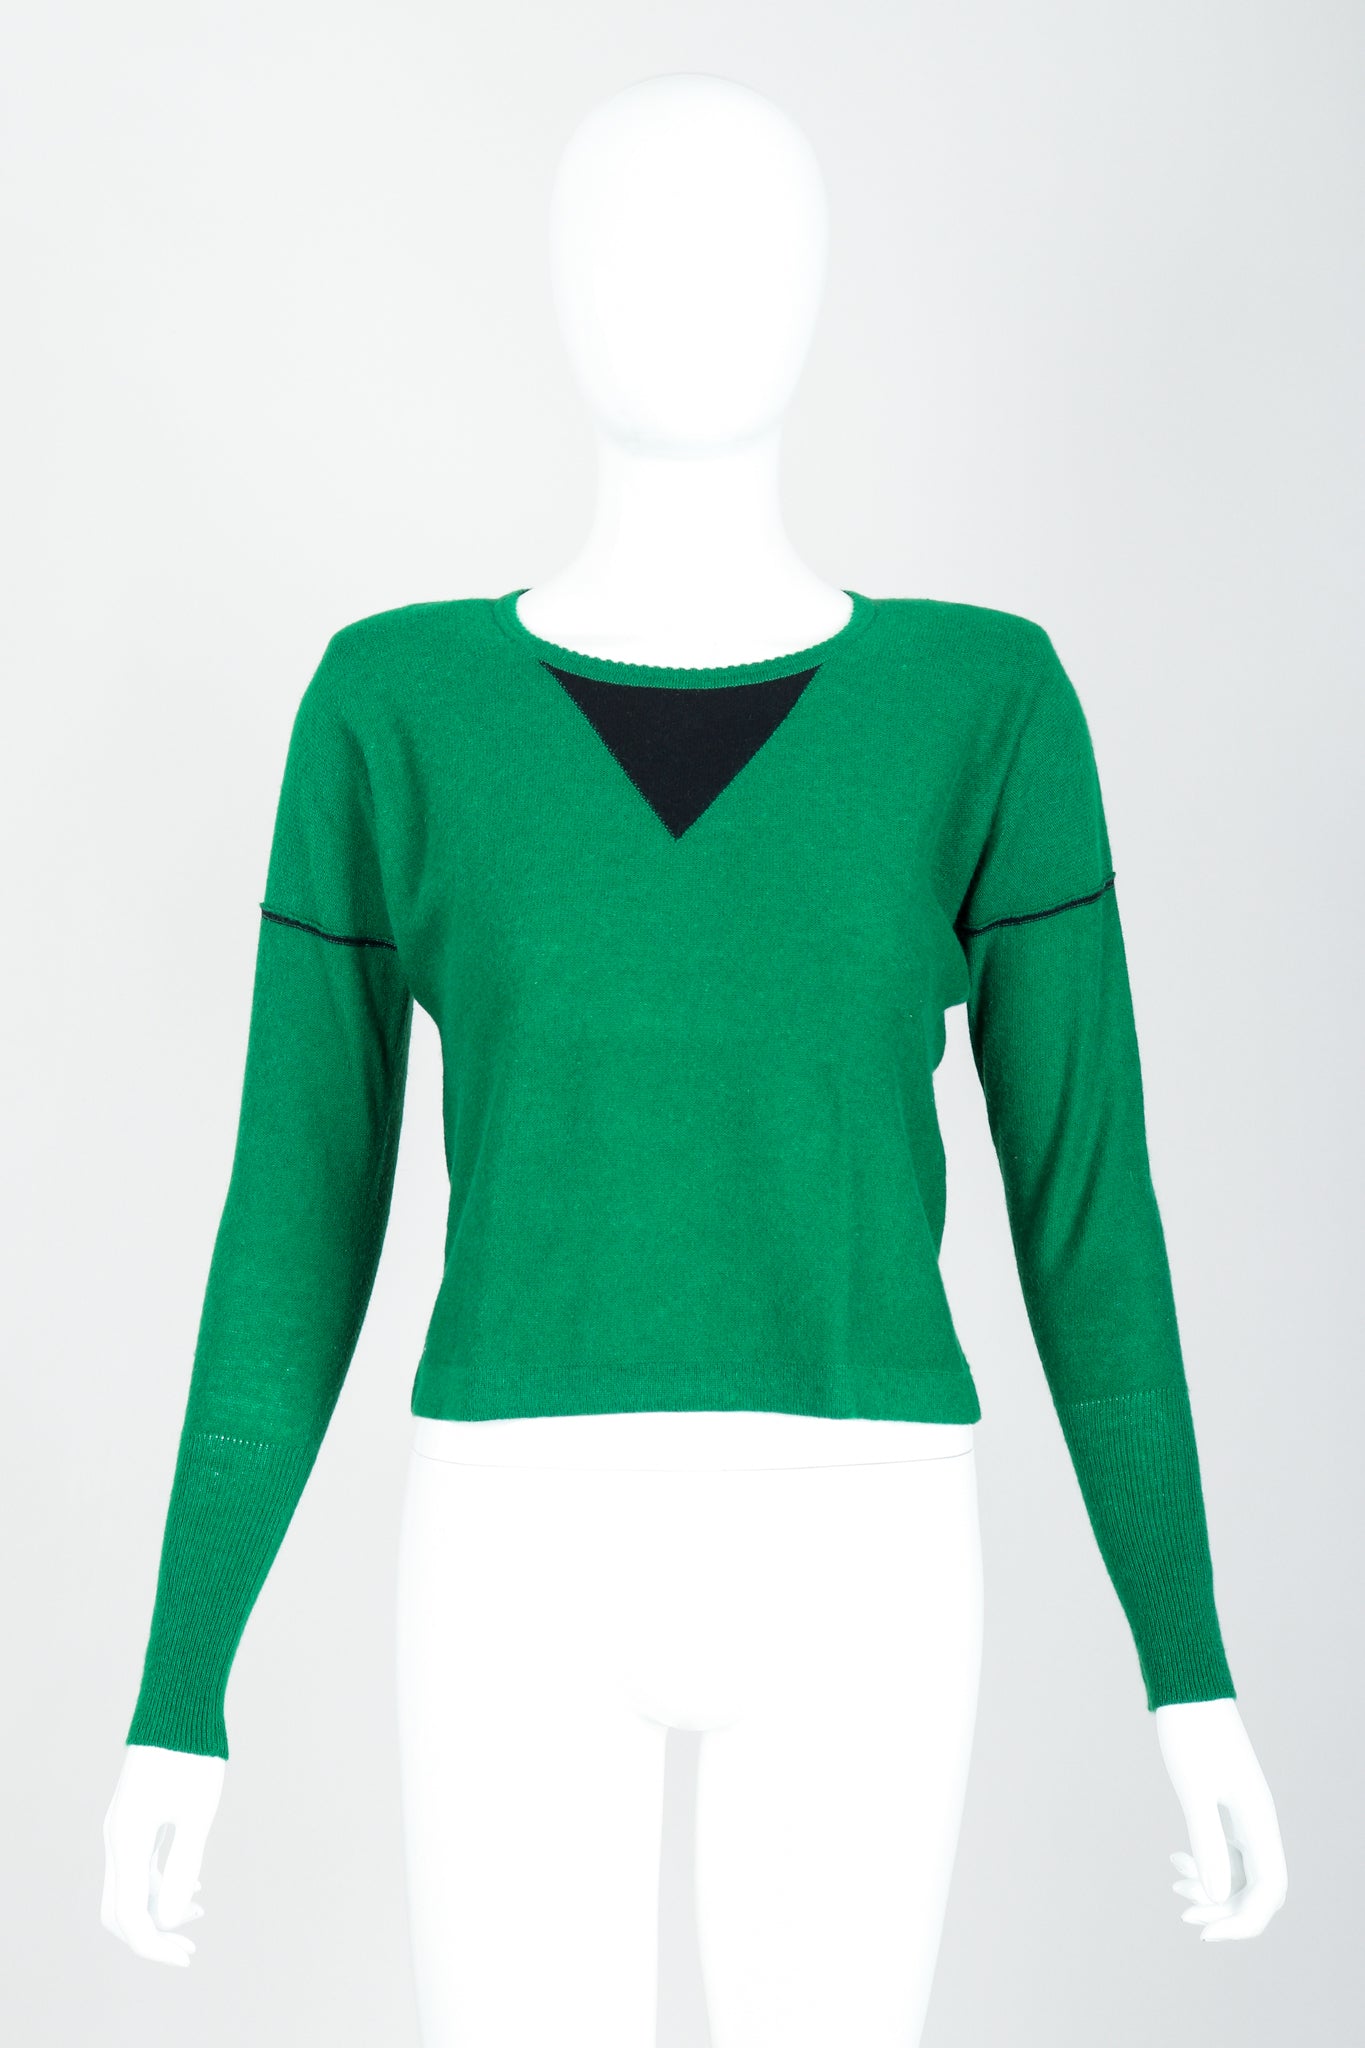 Vintage Sonia Rykiel Green Knit Triangle Yoke Sweater on Mannequin Front at Recess